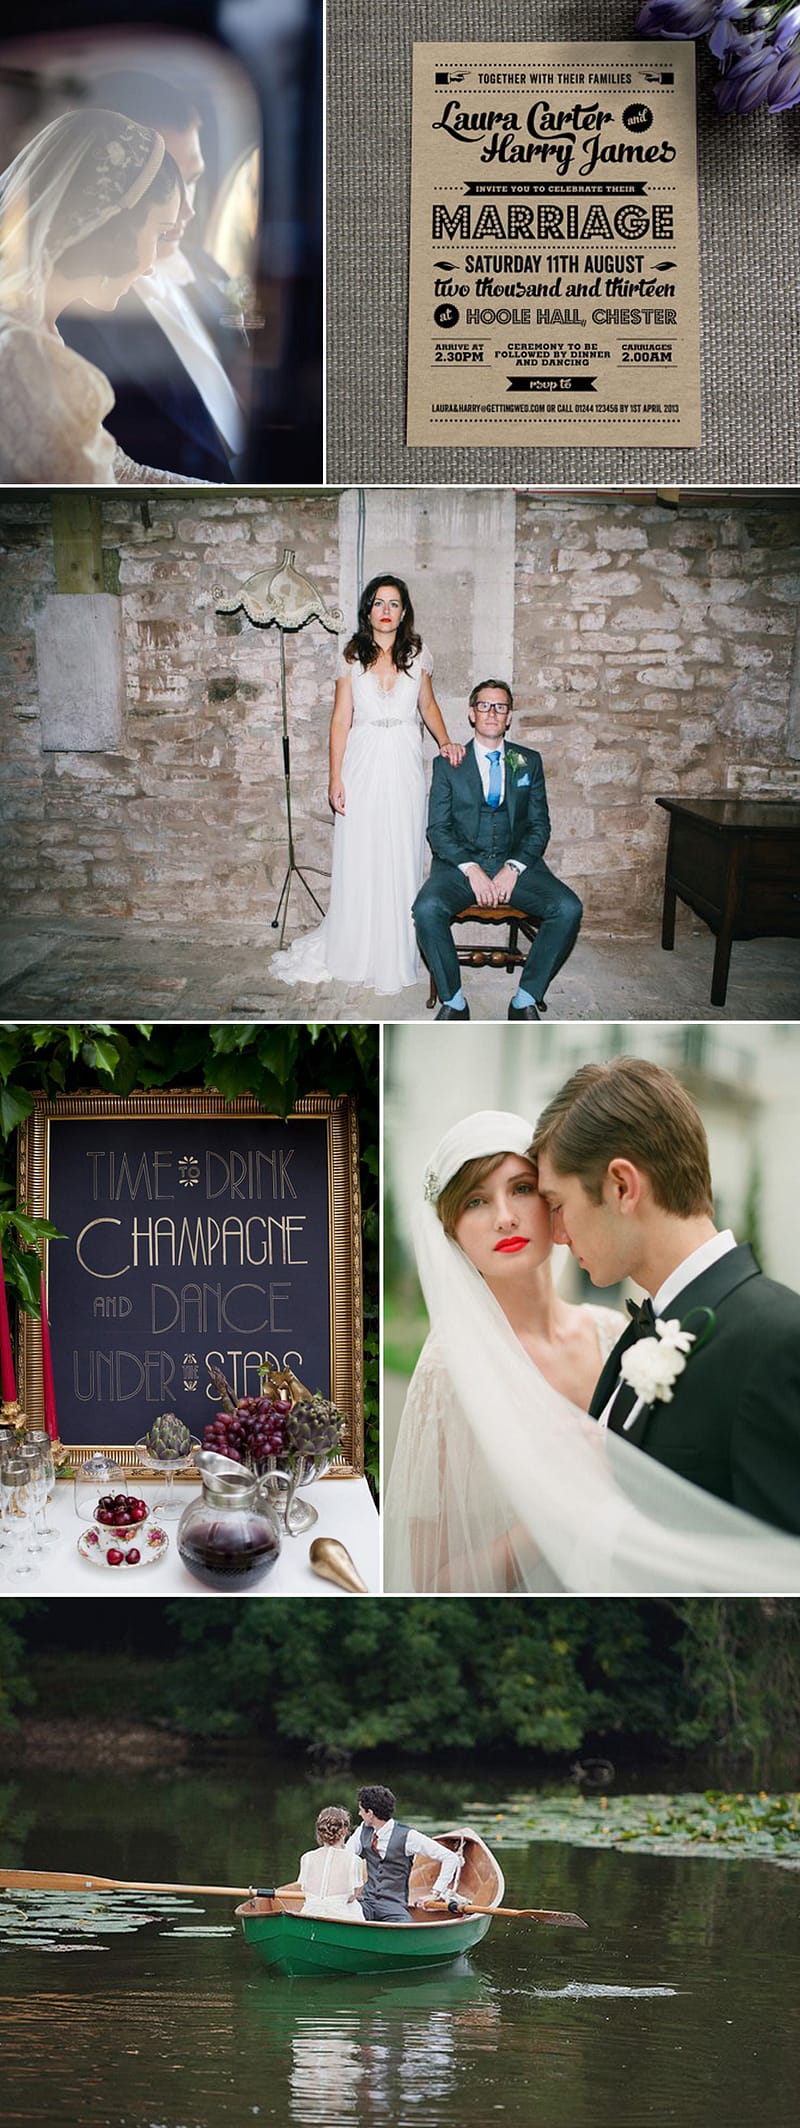 Coco Wedding Venues - Modern Vintage - Wedding Style Category - The Vibe.